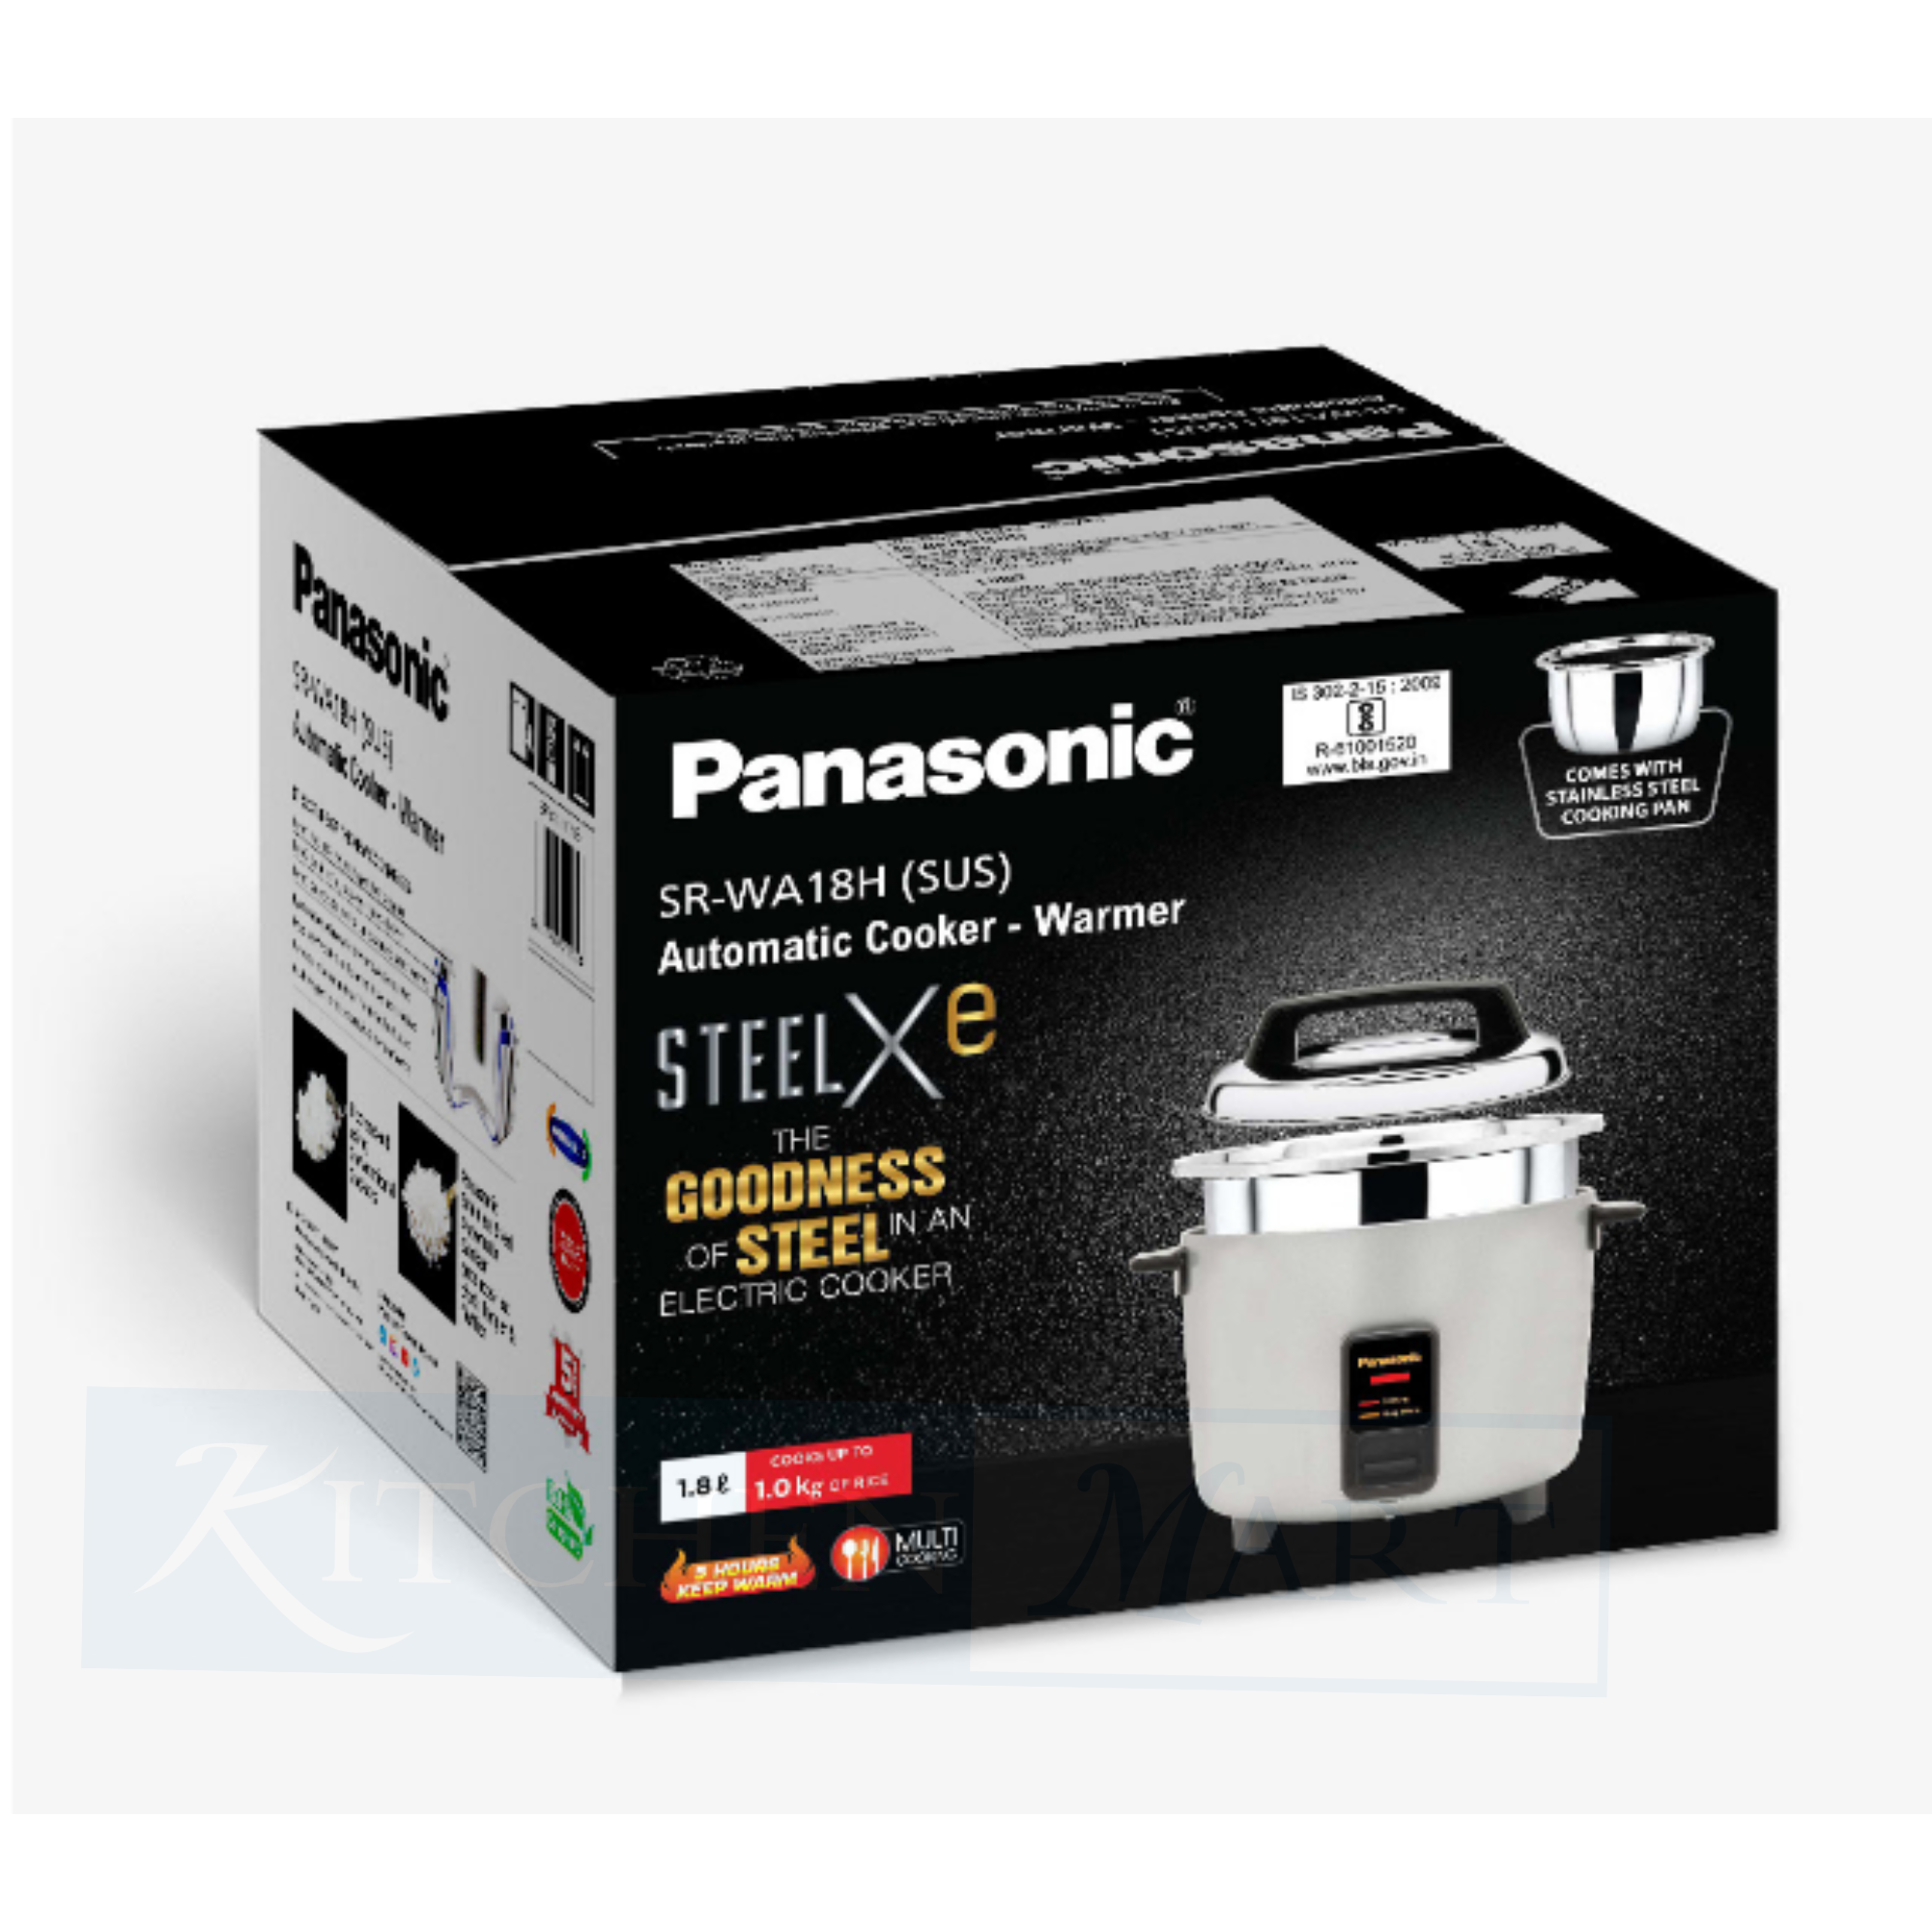 Panasonic SR-WA18H (SUS) - Premium Triply Stainless Steel Rice Cooker for Perfect Cooking